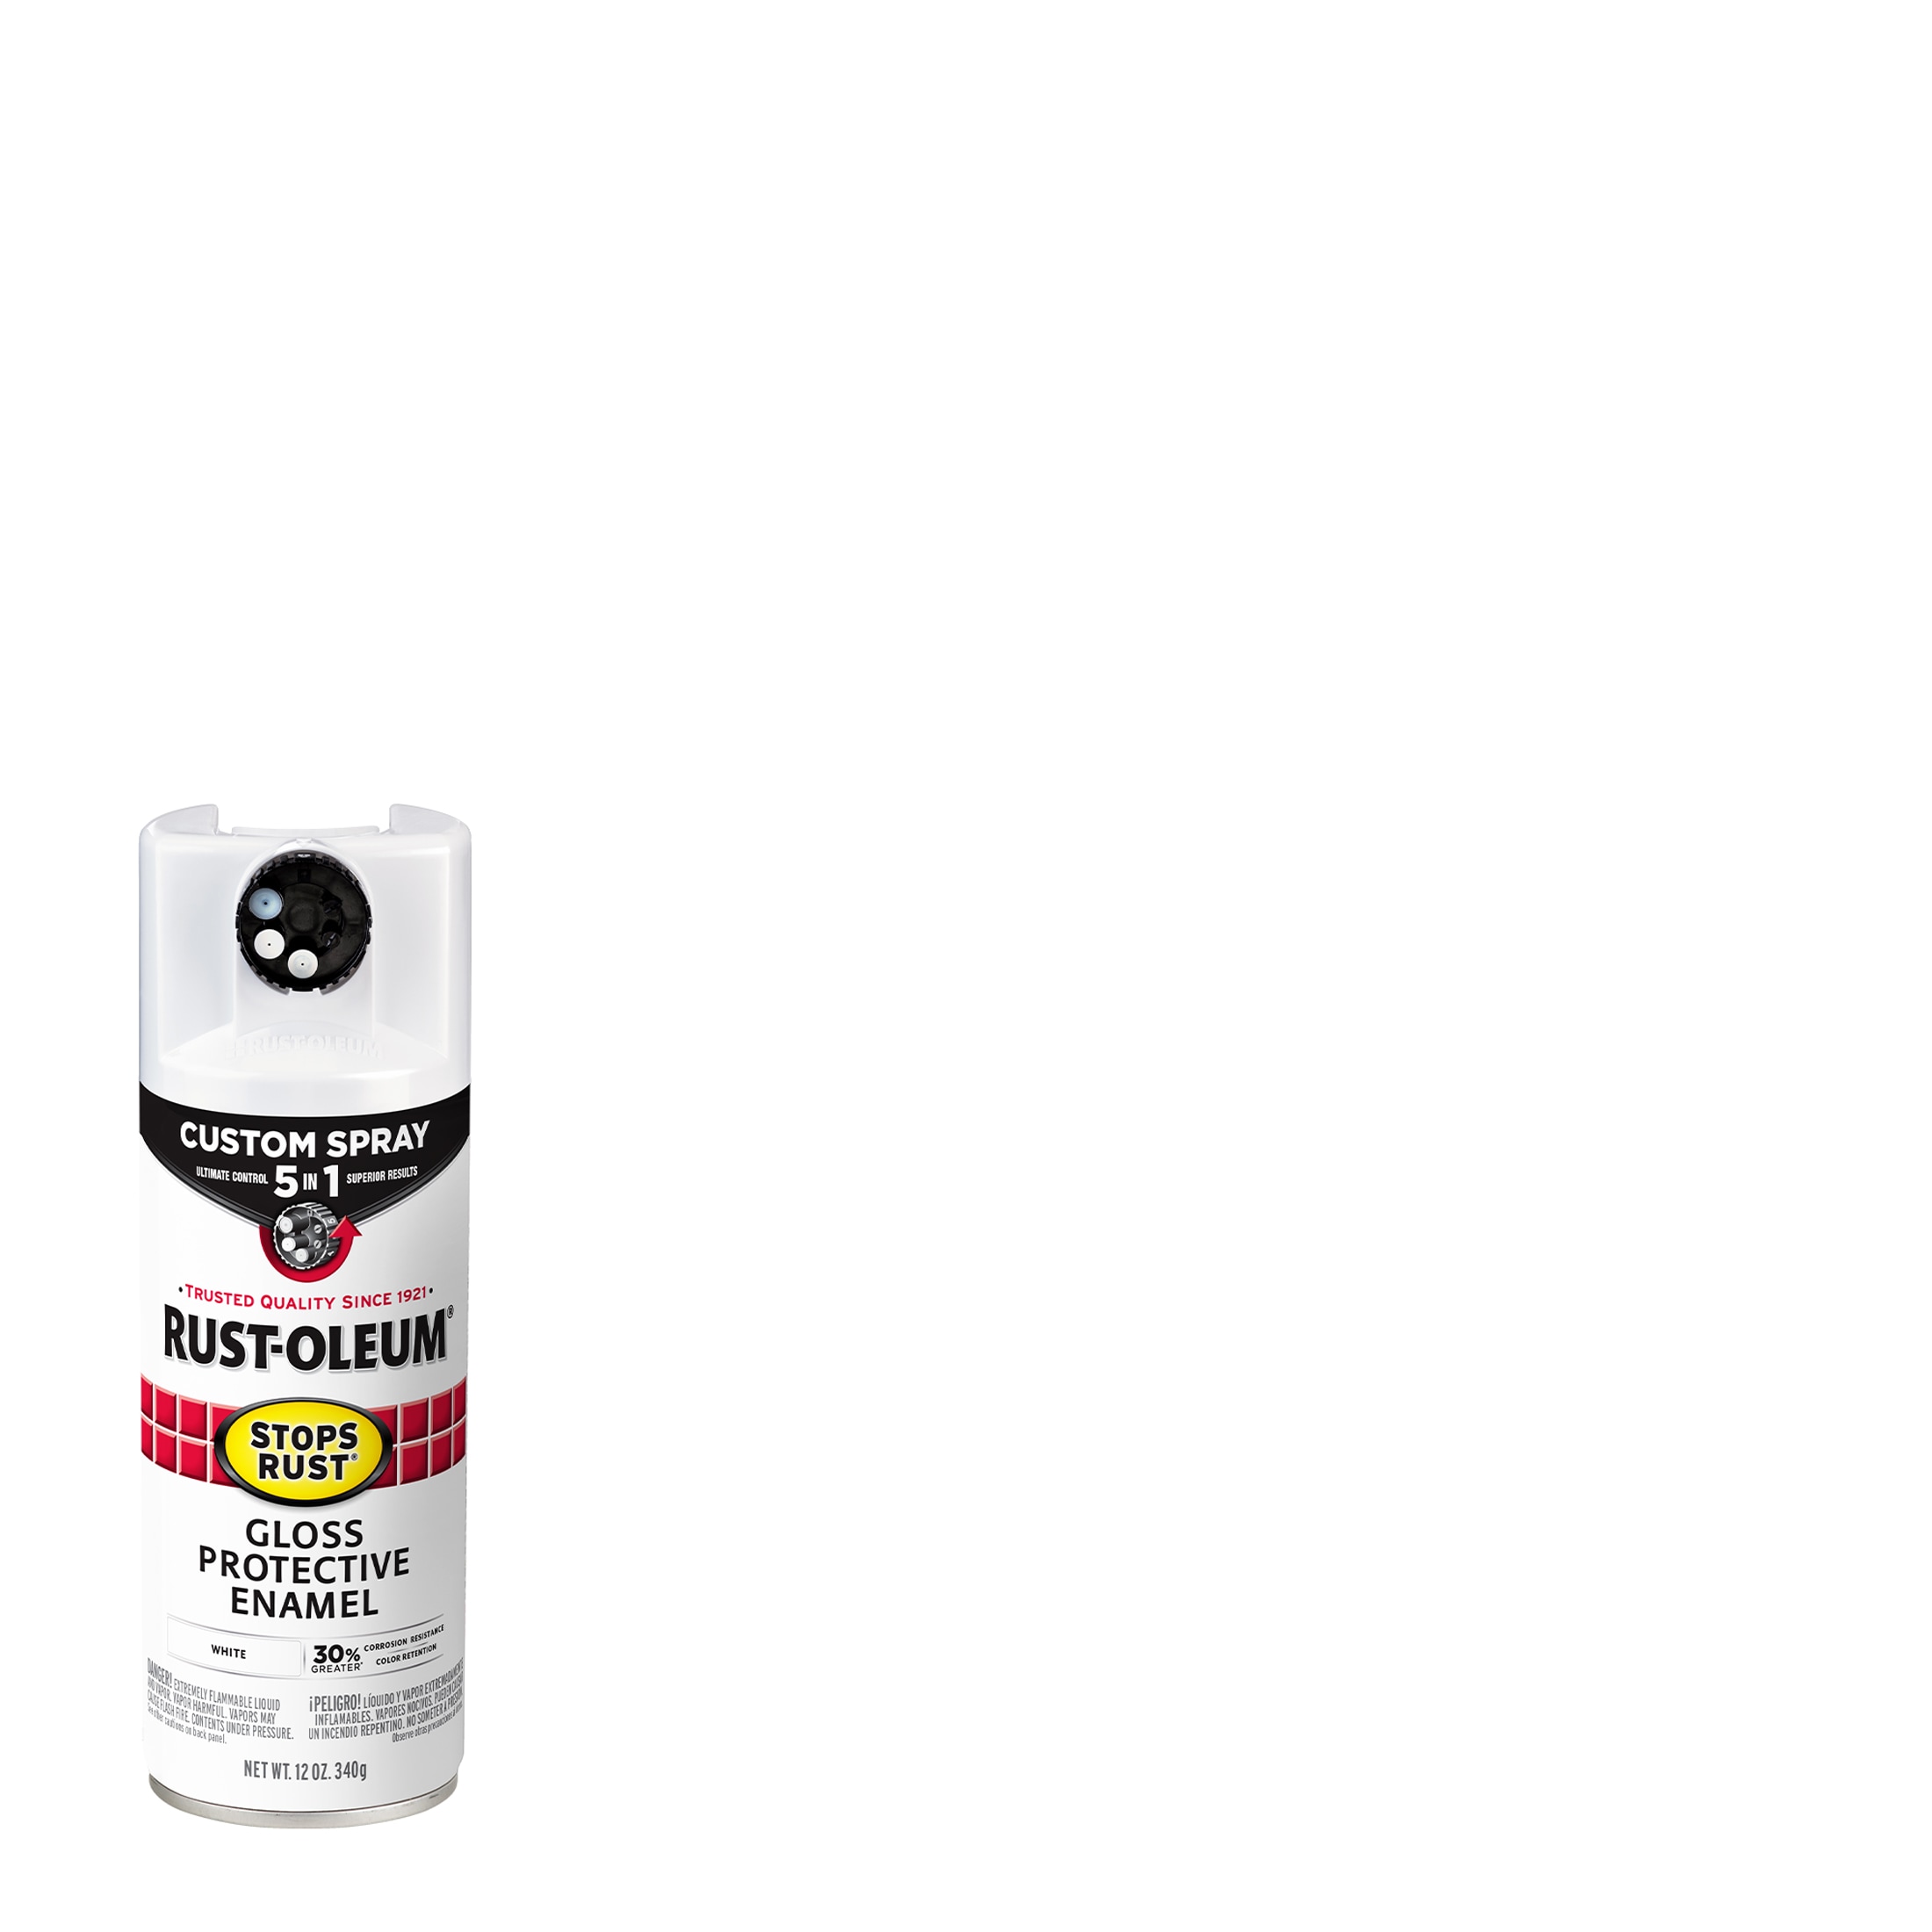 GLUEDEVIL - GLUEDEVIL High Heat Spray Paint is ideal for use on the  exterior of braai stands, fire places, stoves, automotive parts and so much  more. This range will keep your objects